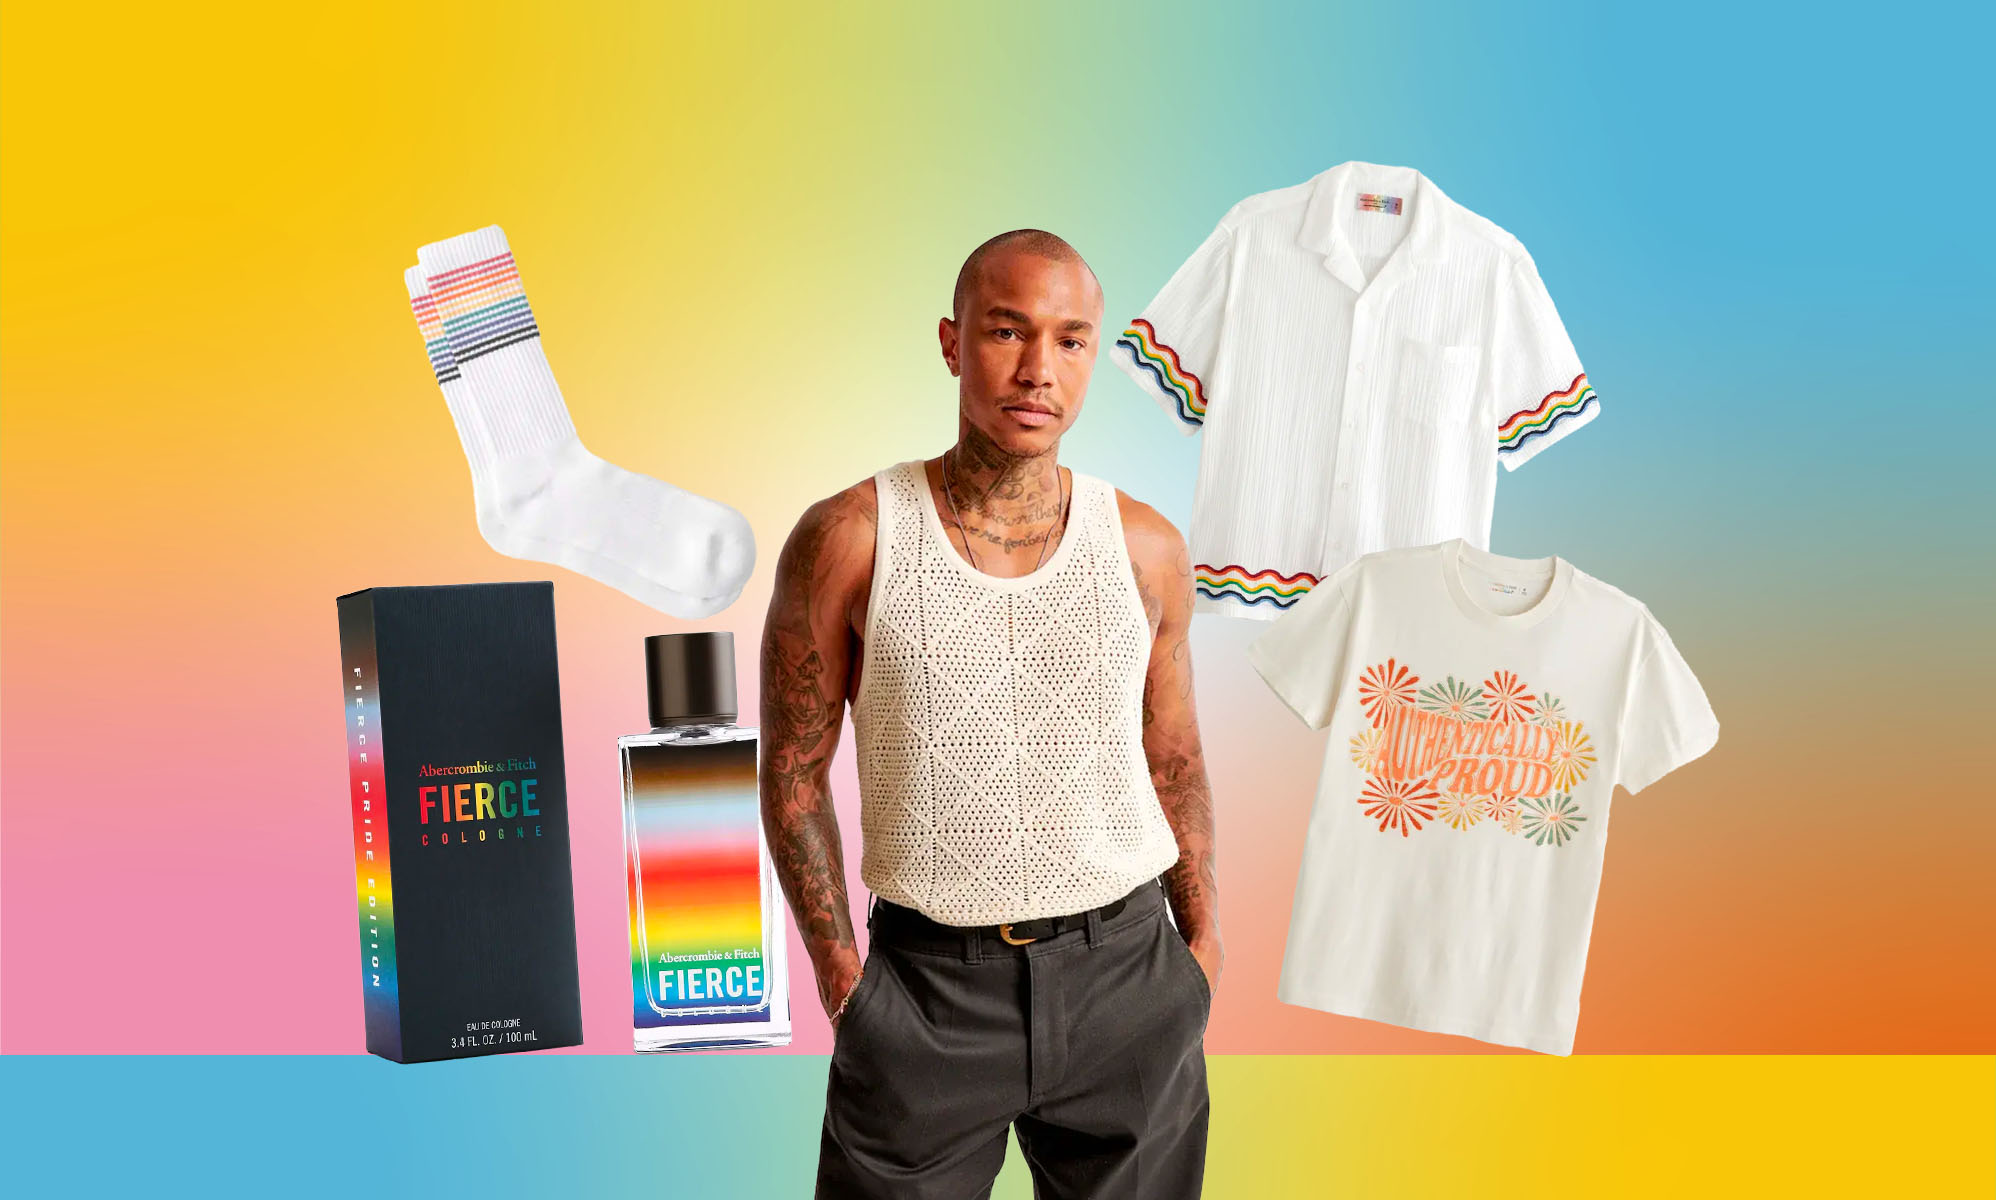 The Target Pride Collection Is Back, And It's Actually Iconic This Year